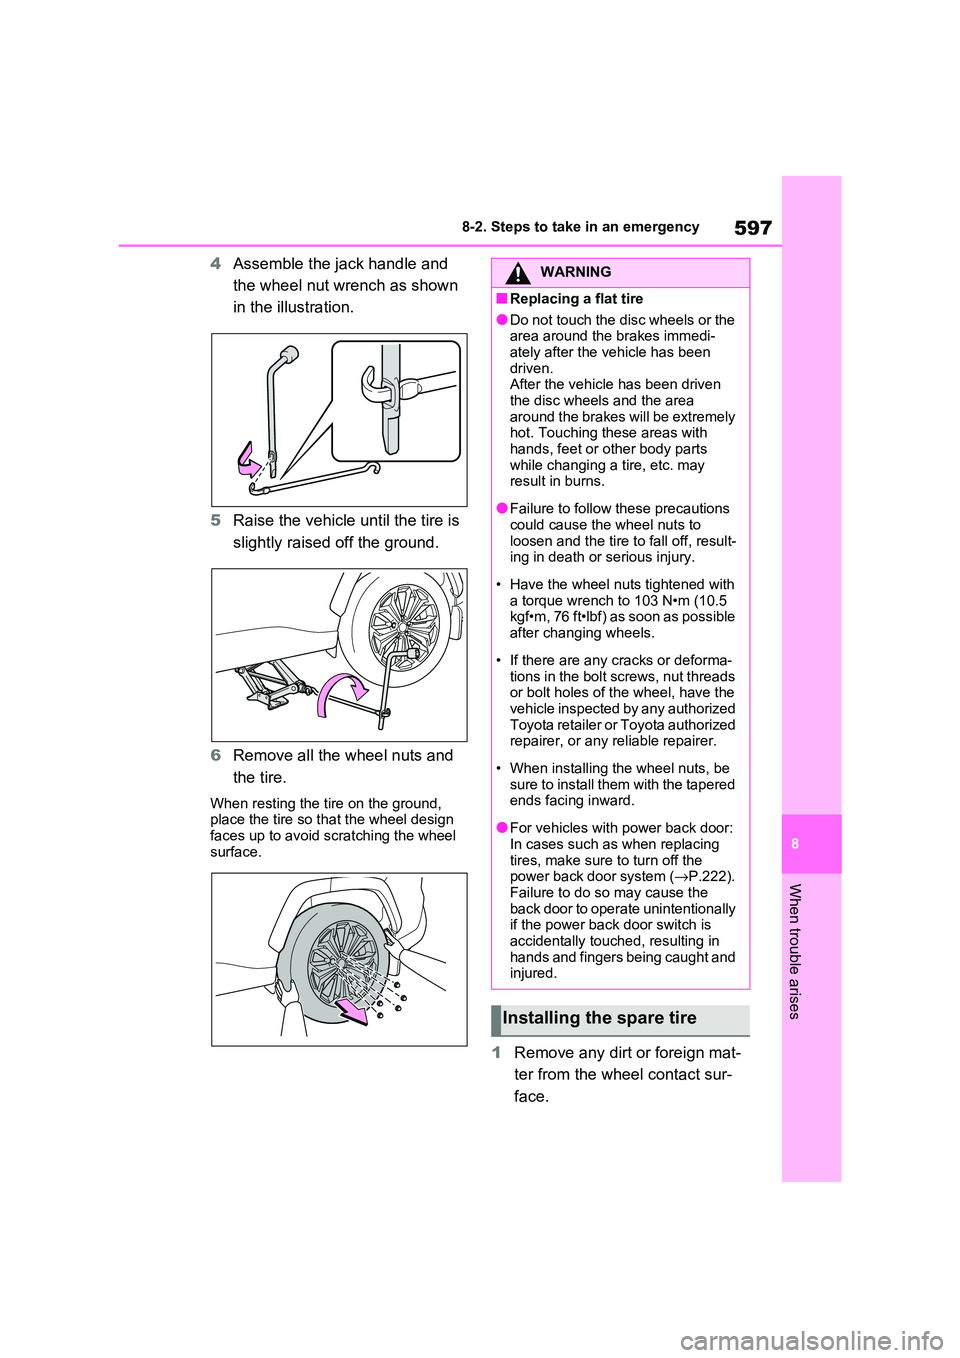 TOYOTA RAV4 PHEV 2021  Owners Manual 597
8 
8-2. Steps to take in an emergency
When trouble arises
4 Assemble the jack handle and  
the wheel nut wrench as shown 
in the illustration. 
5 Raise the vehicle until the tire is  
slightly rai